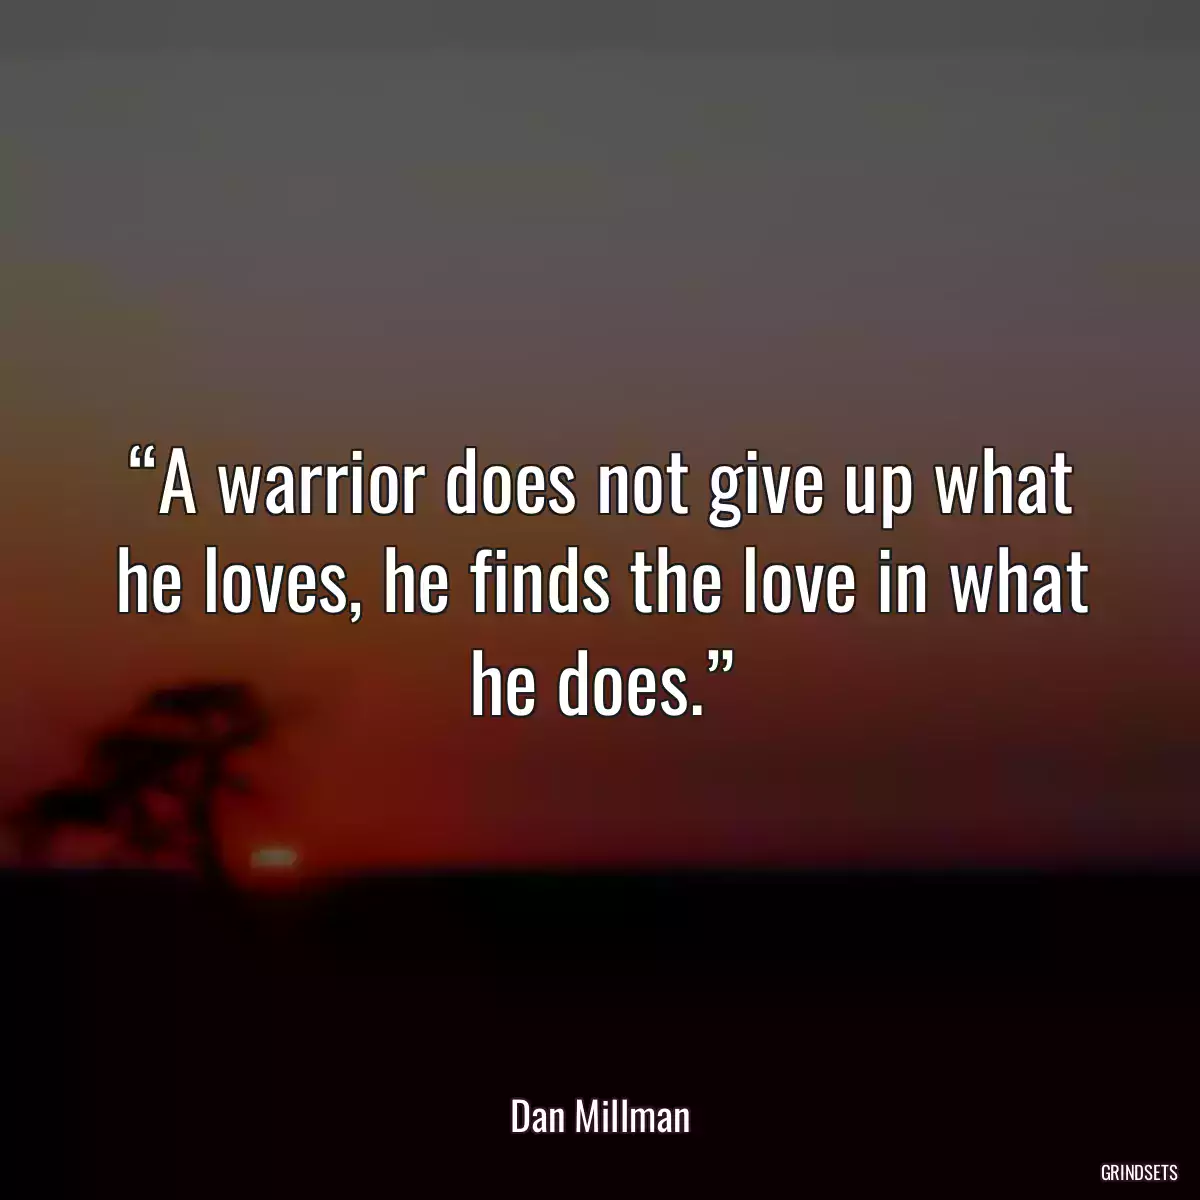 “A warrior does not give up what he loves, he finds the love in what he does.”